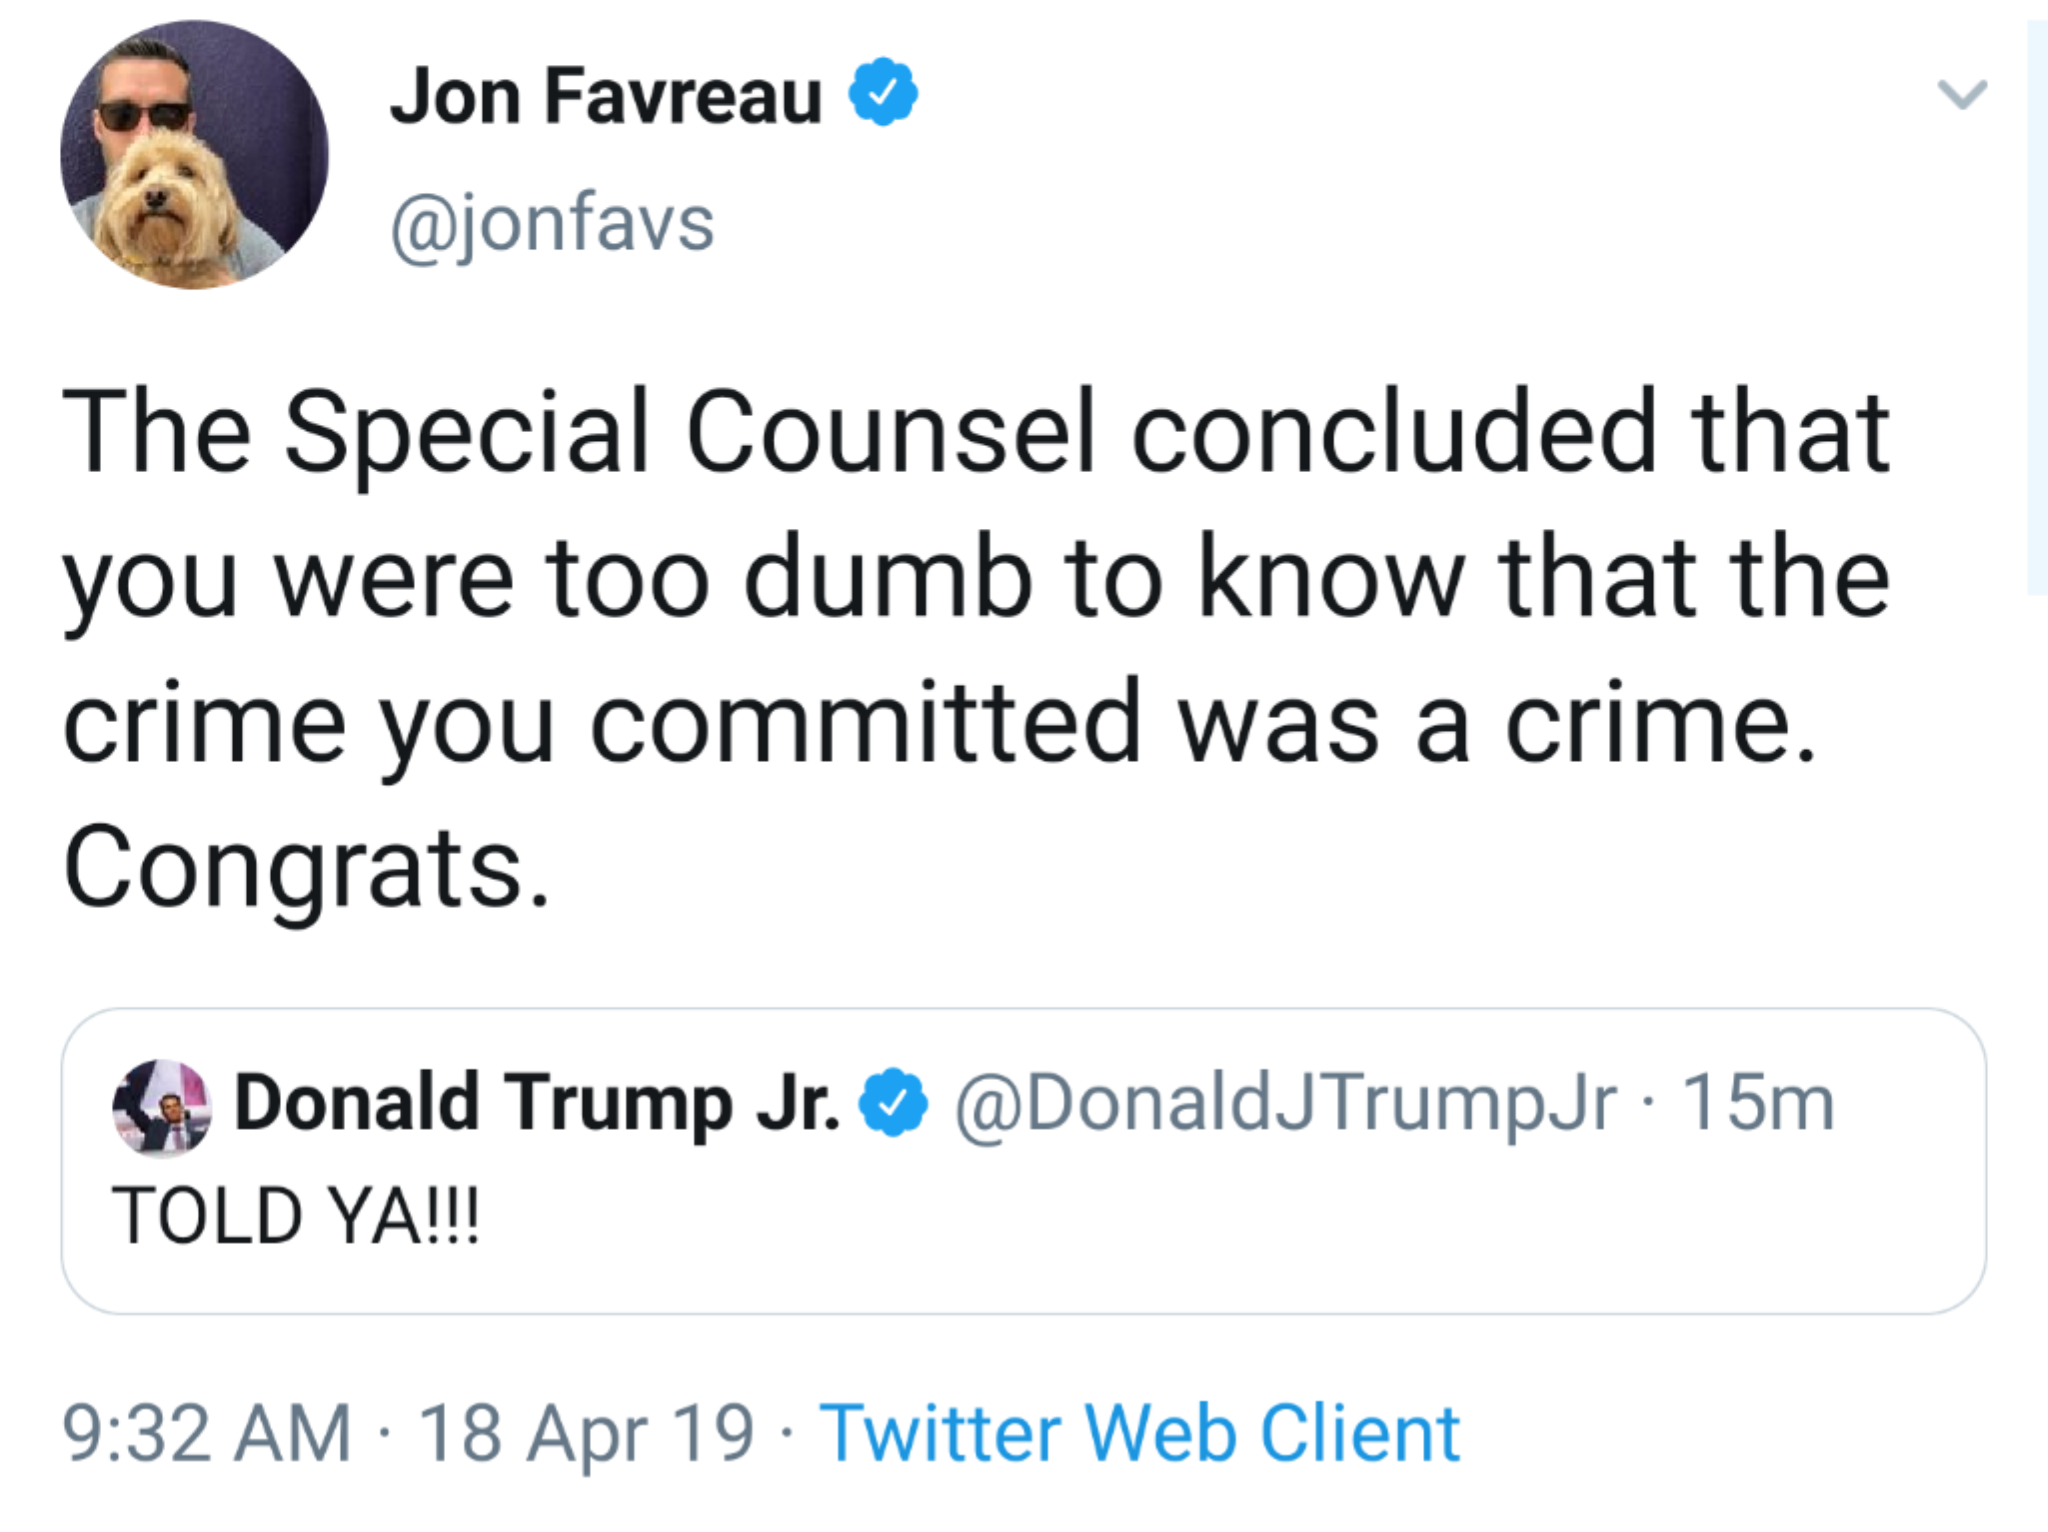 Jon Favreau The Special Counsel concluded that you were too dumb to know that the crime you committed was a crime. Congrats. Donald Trump Jr. Told Ya!!! Jr 15m 18 Apr 19. Twitter Web Client